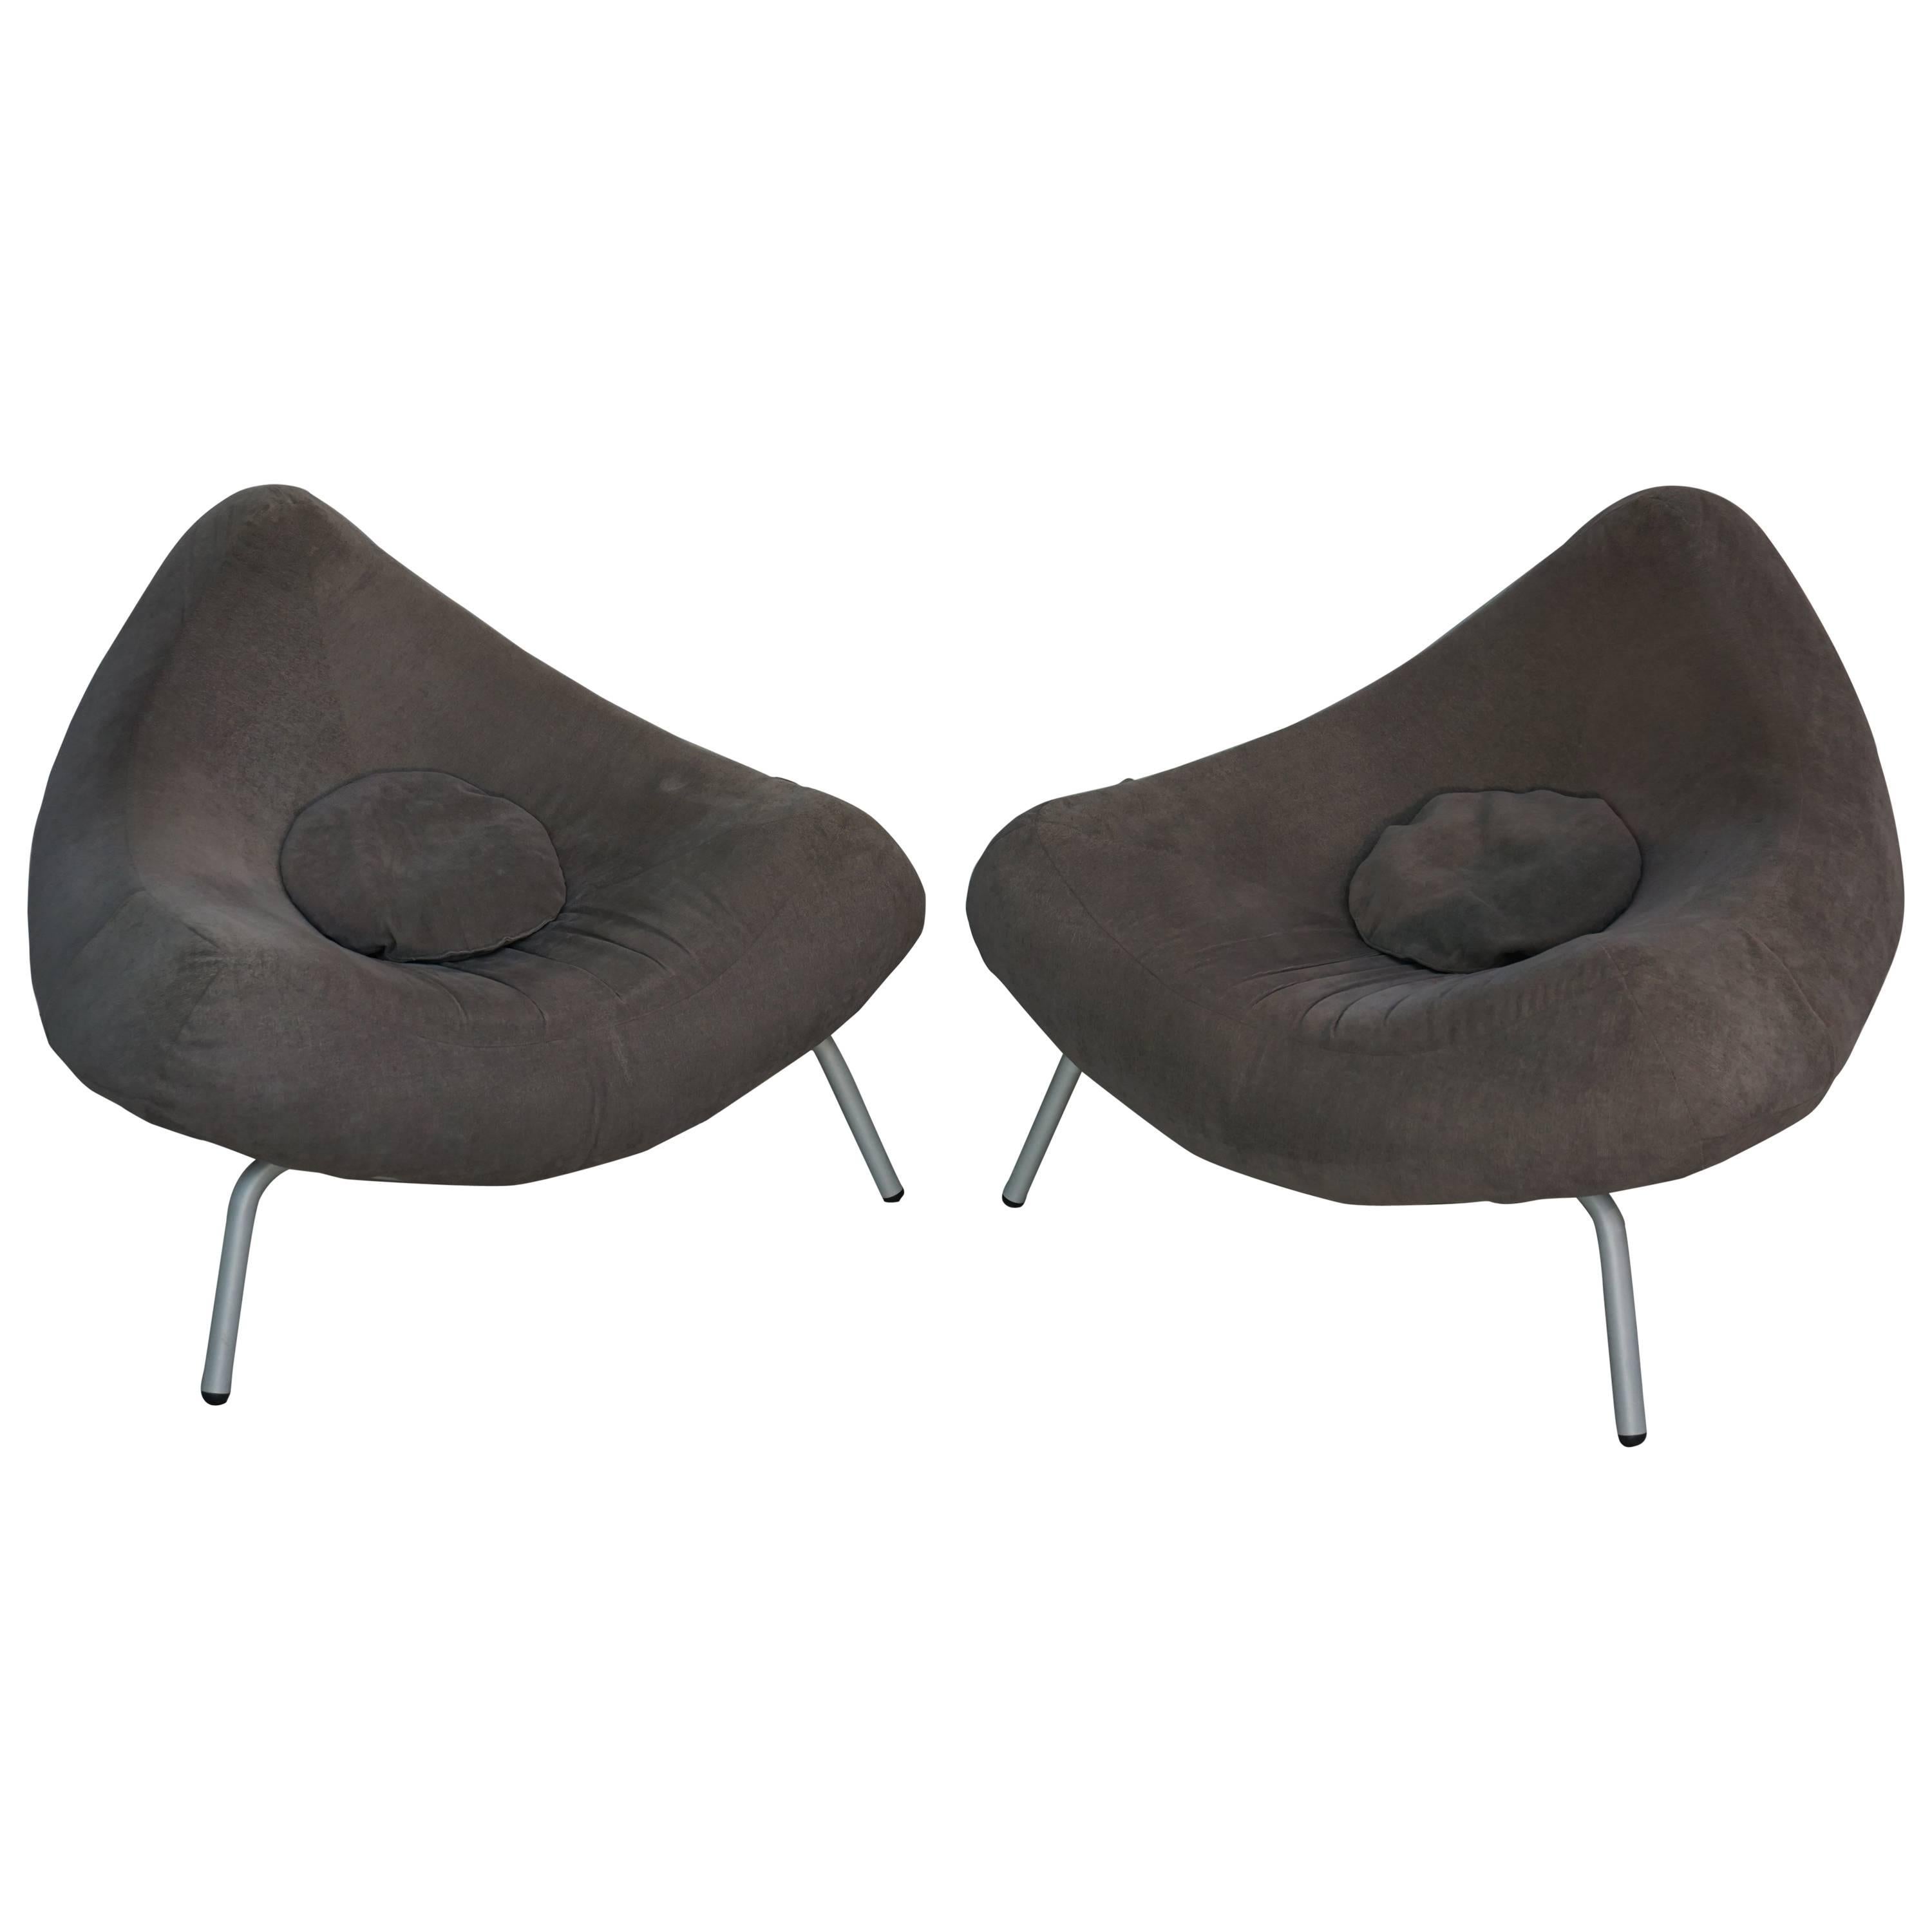 Pair of "Chili" Lounge Armchair Design by Paul Falkenberg